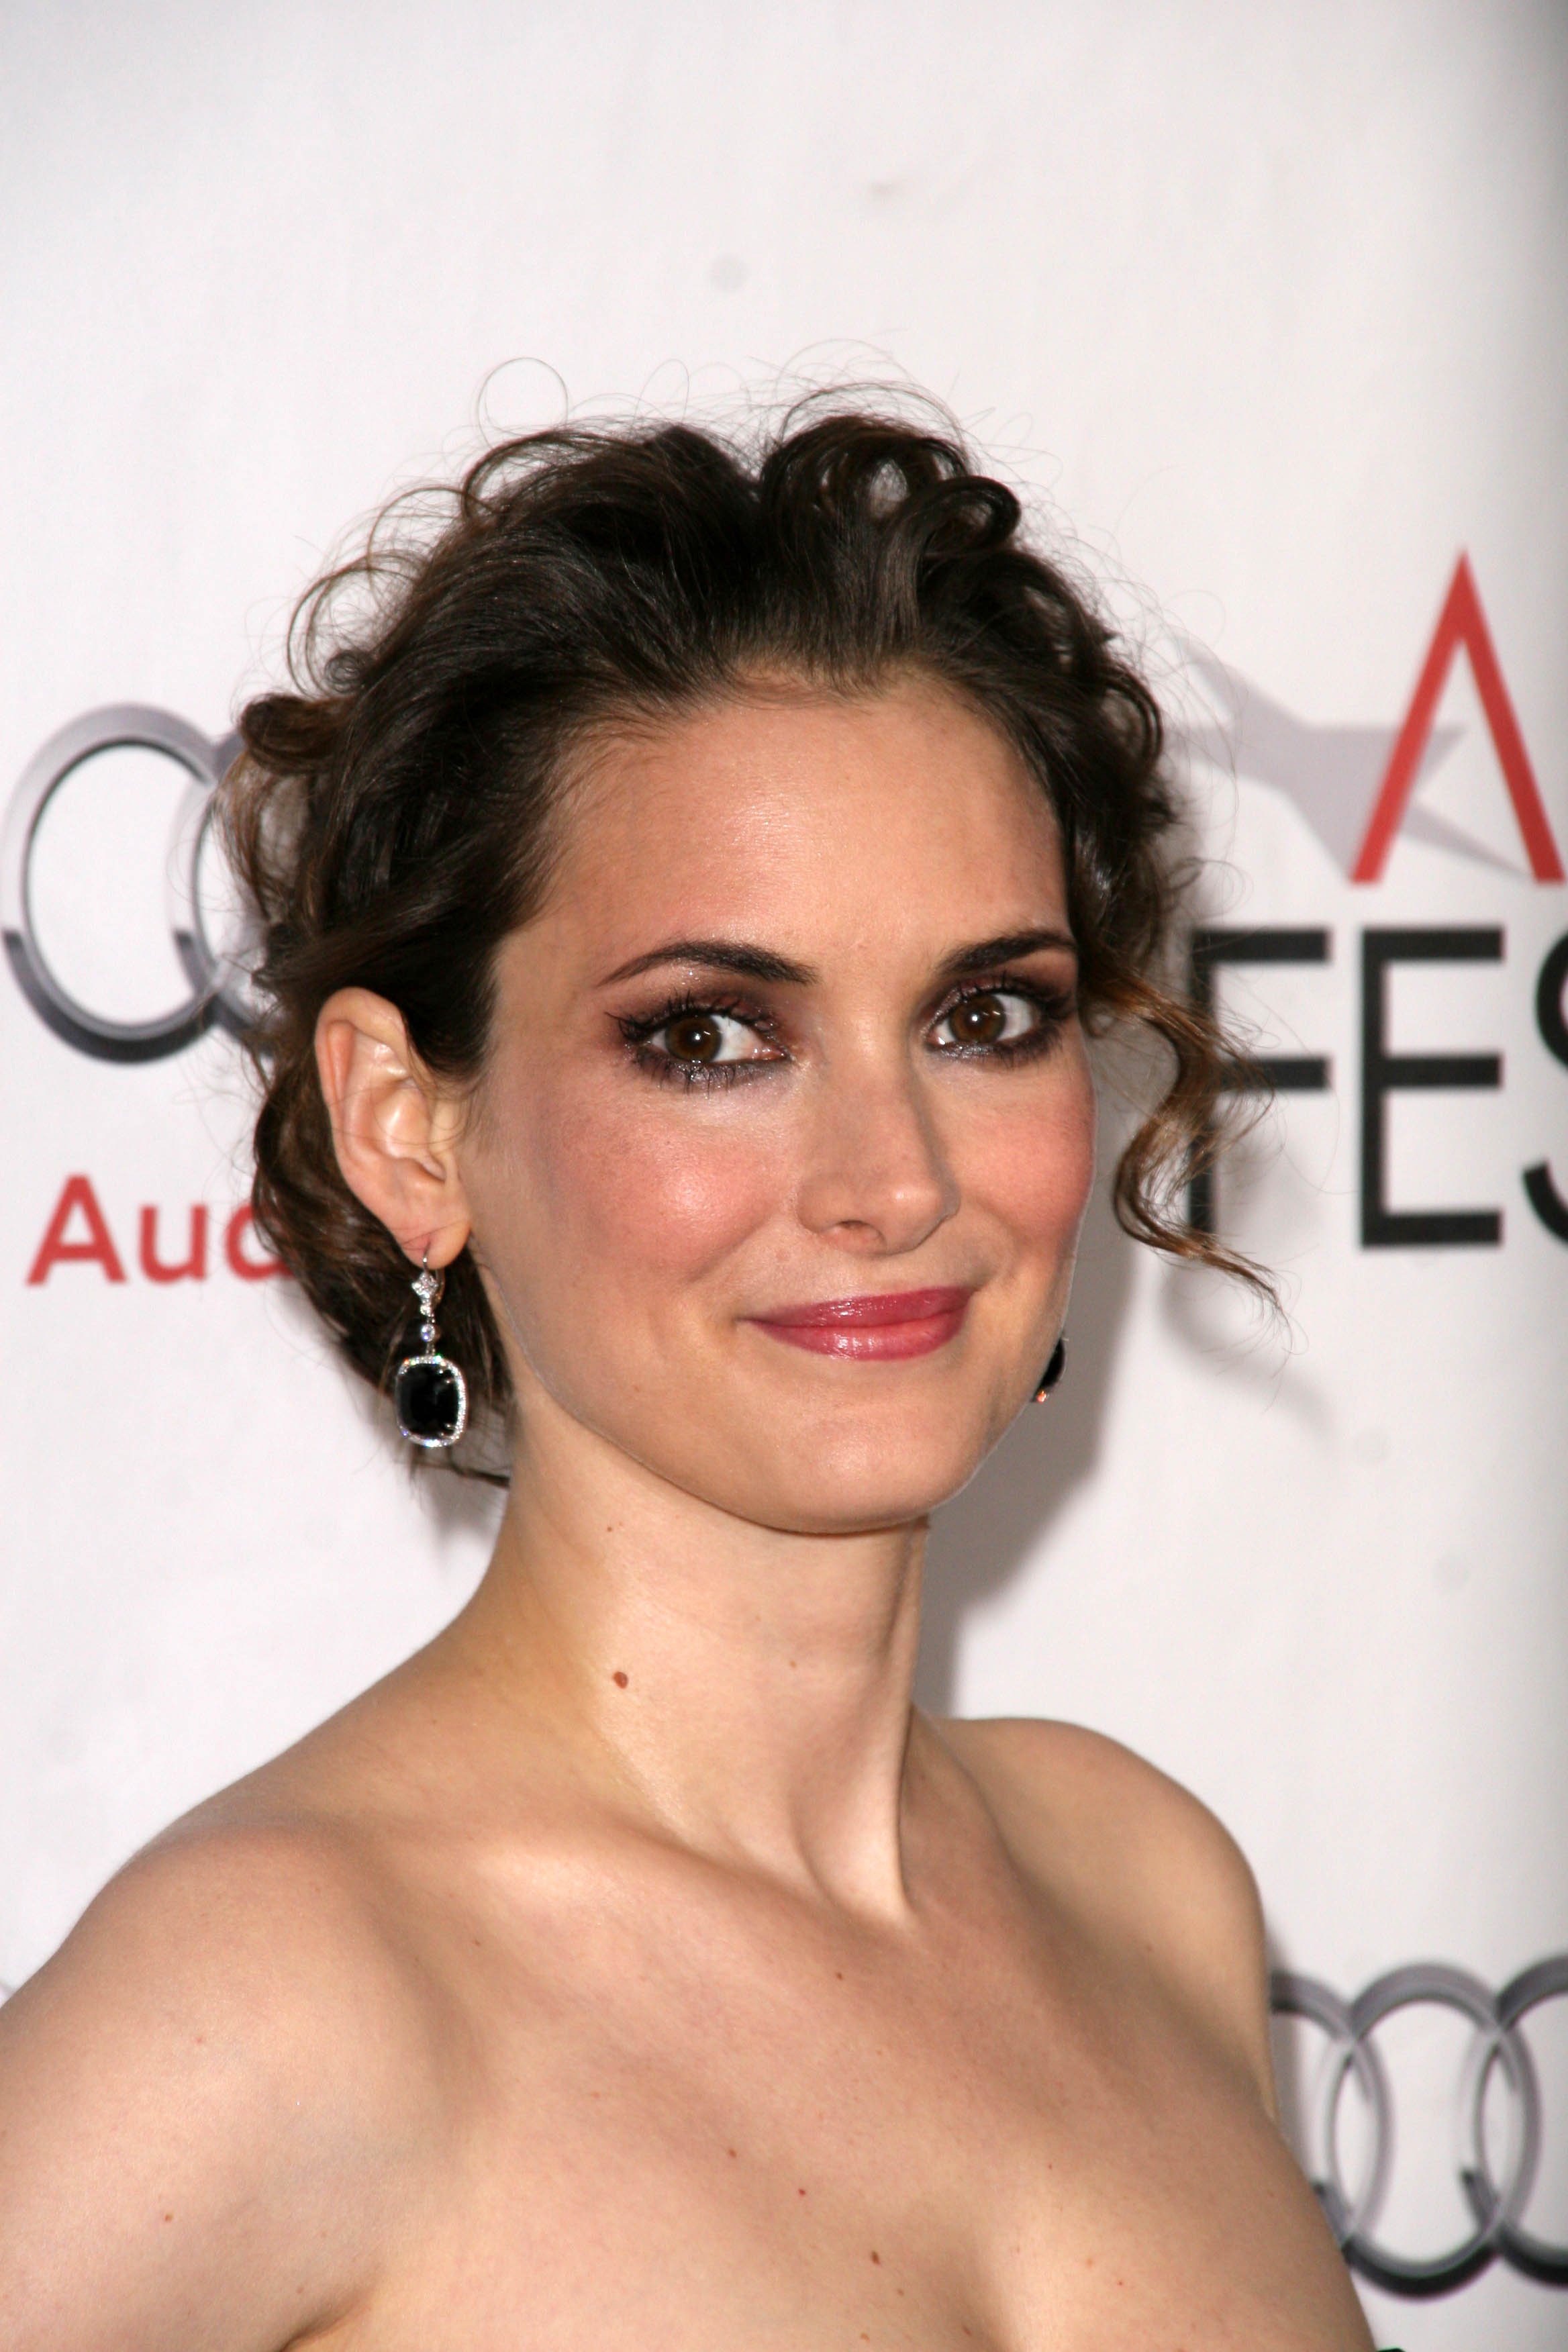 SS3111589) Movie picture of Winona Ryder buy celebrity photos and posters  at Starstills.com